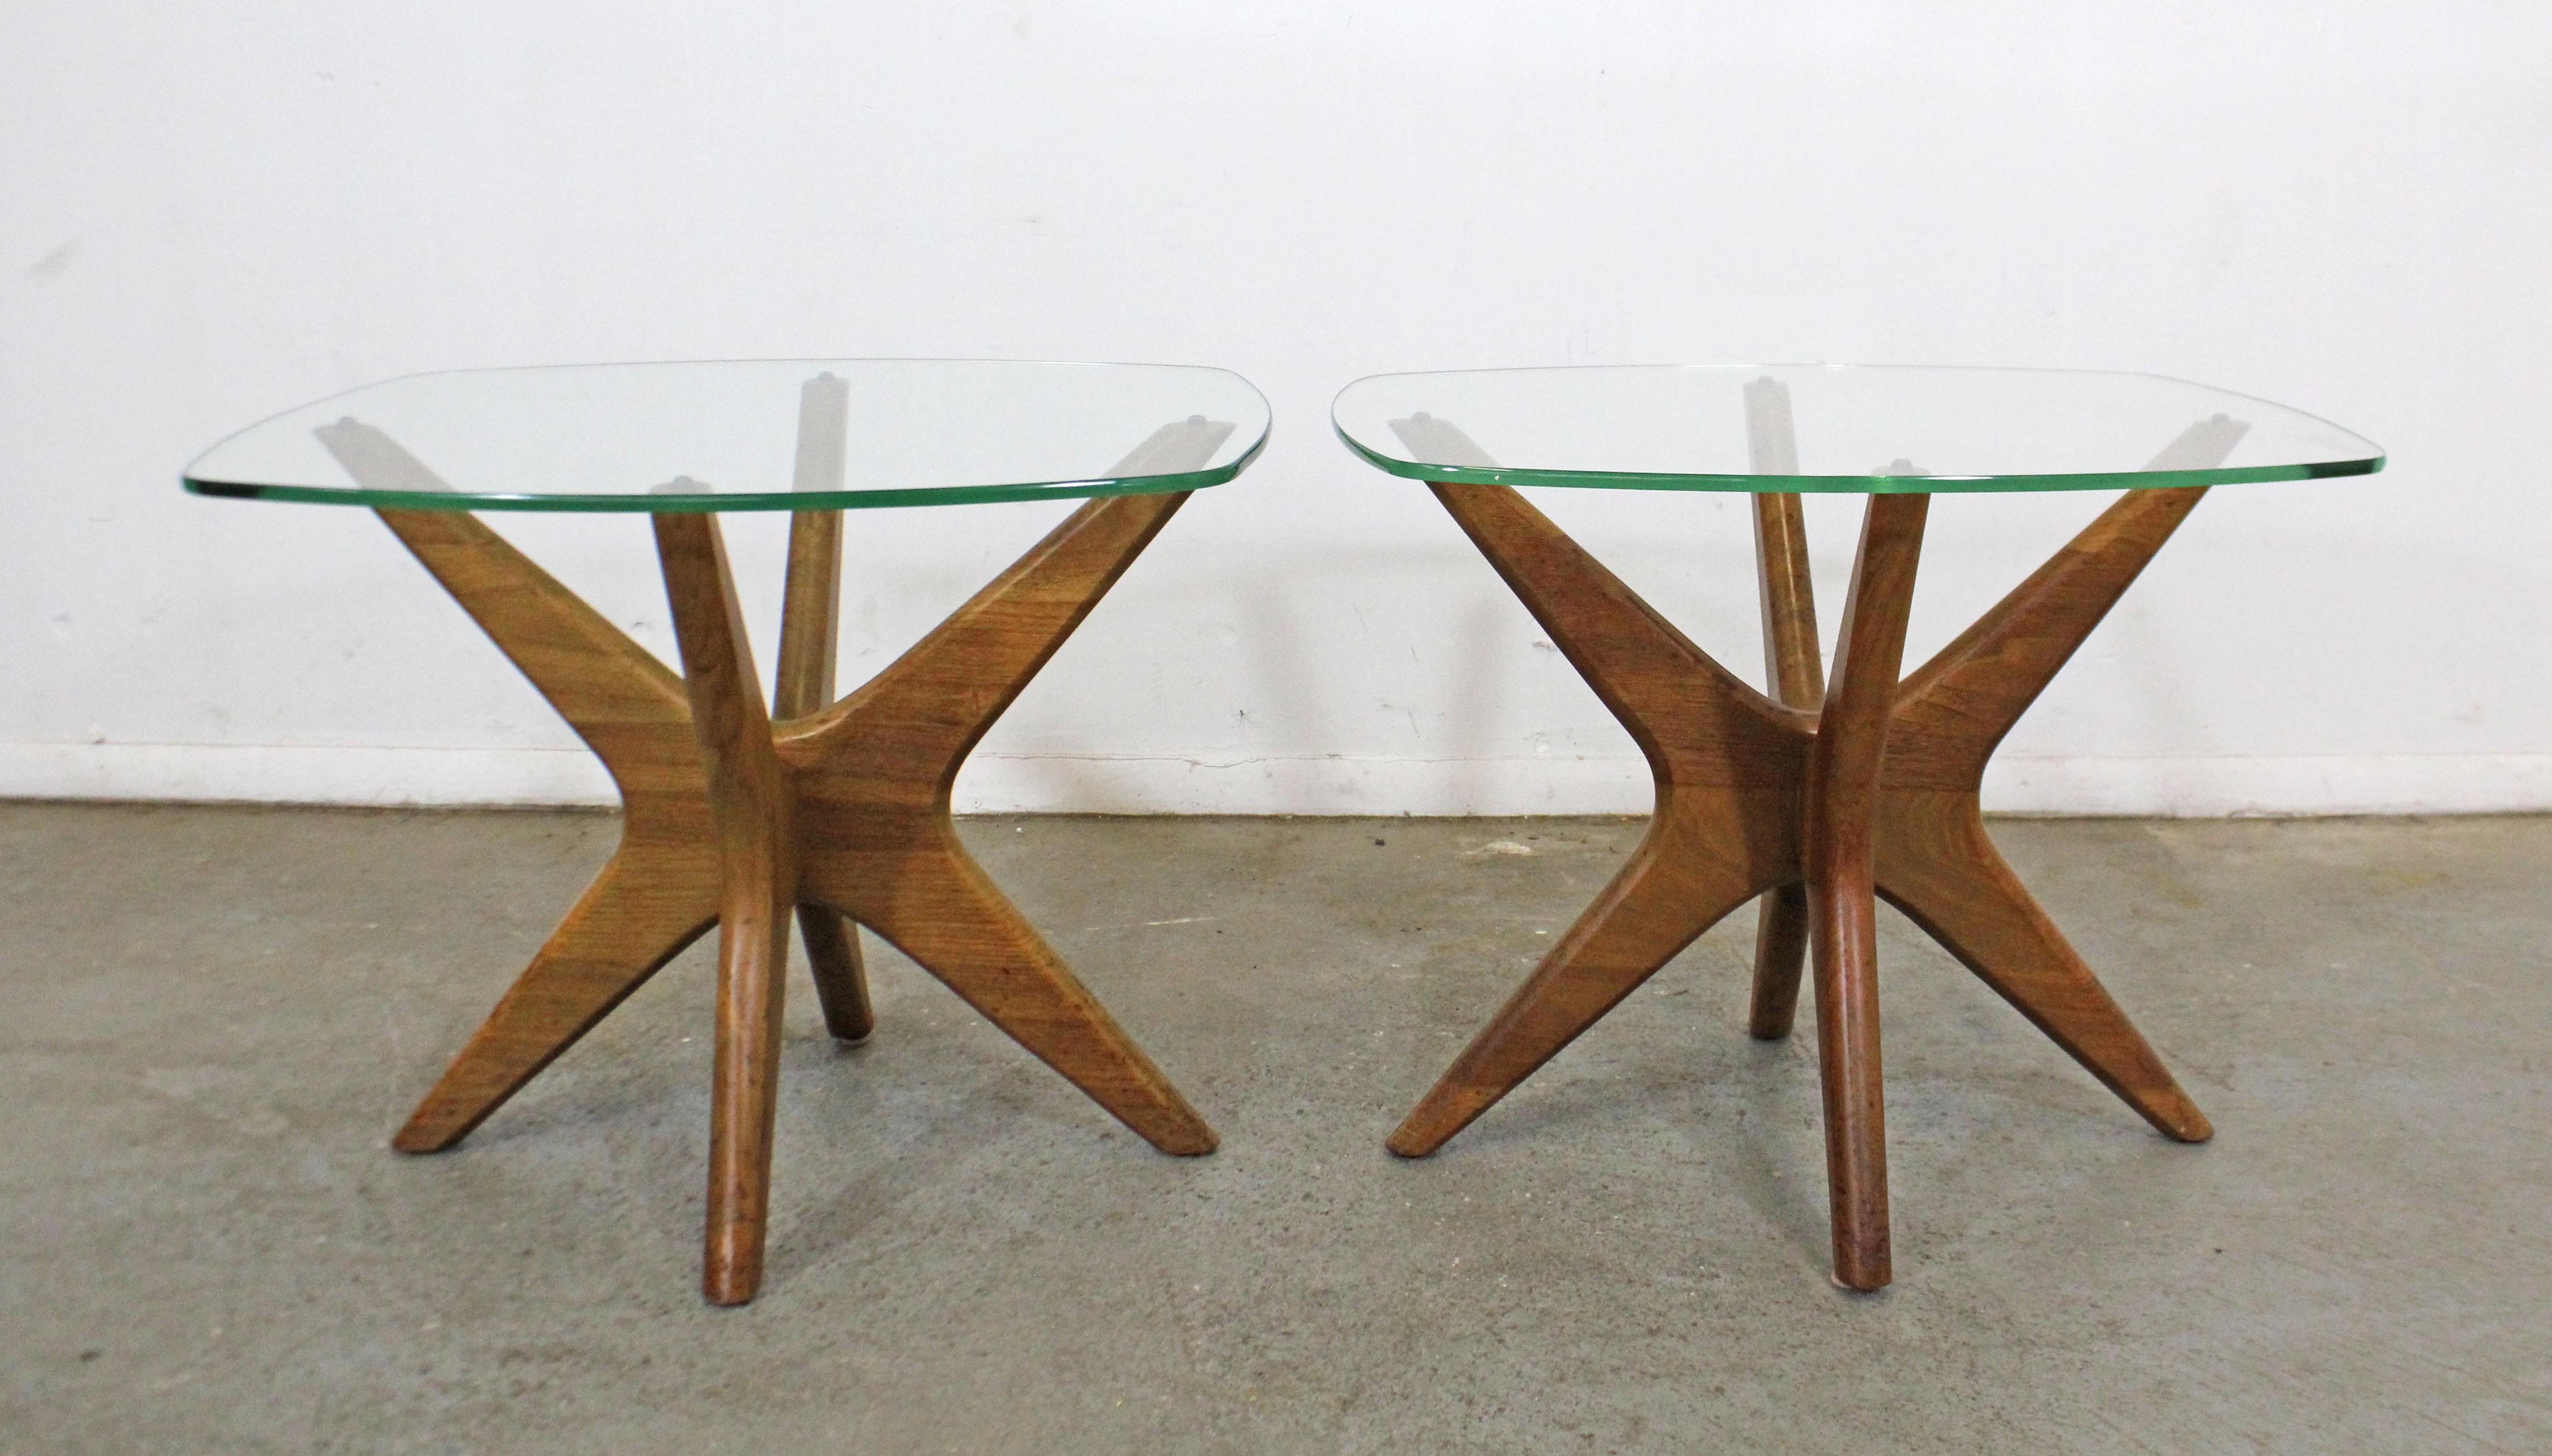 Offered is an authentic pair of vintage Adrian Pearsall 'Jacks' end tables with sculpted wooden bases and thick glass tops. In good condition for their age showing some age wear including surface scratches on wood and glass, small chip on one glass